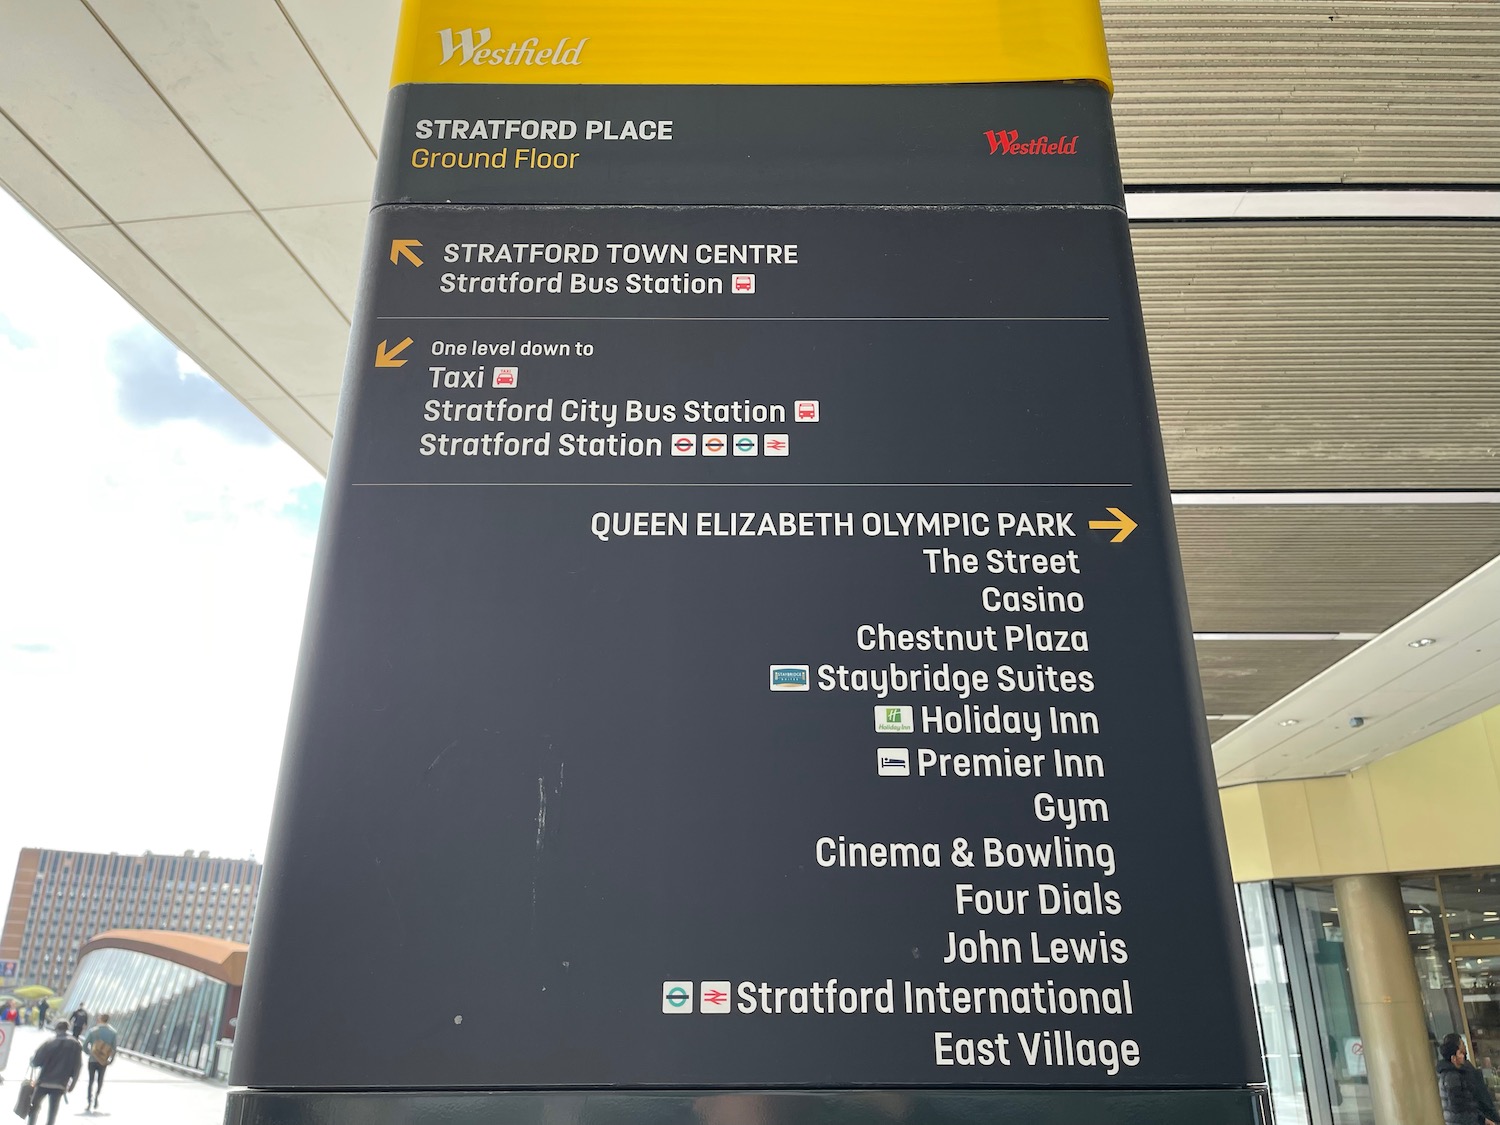 a sign with white text and yellow text